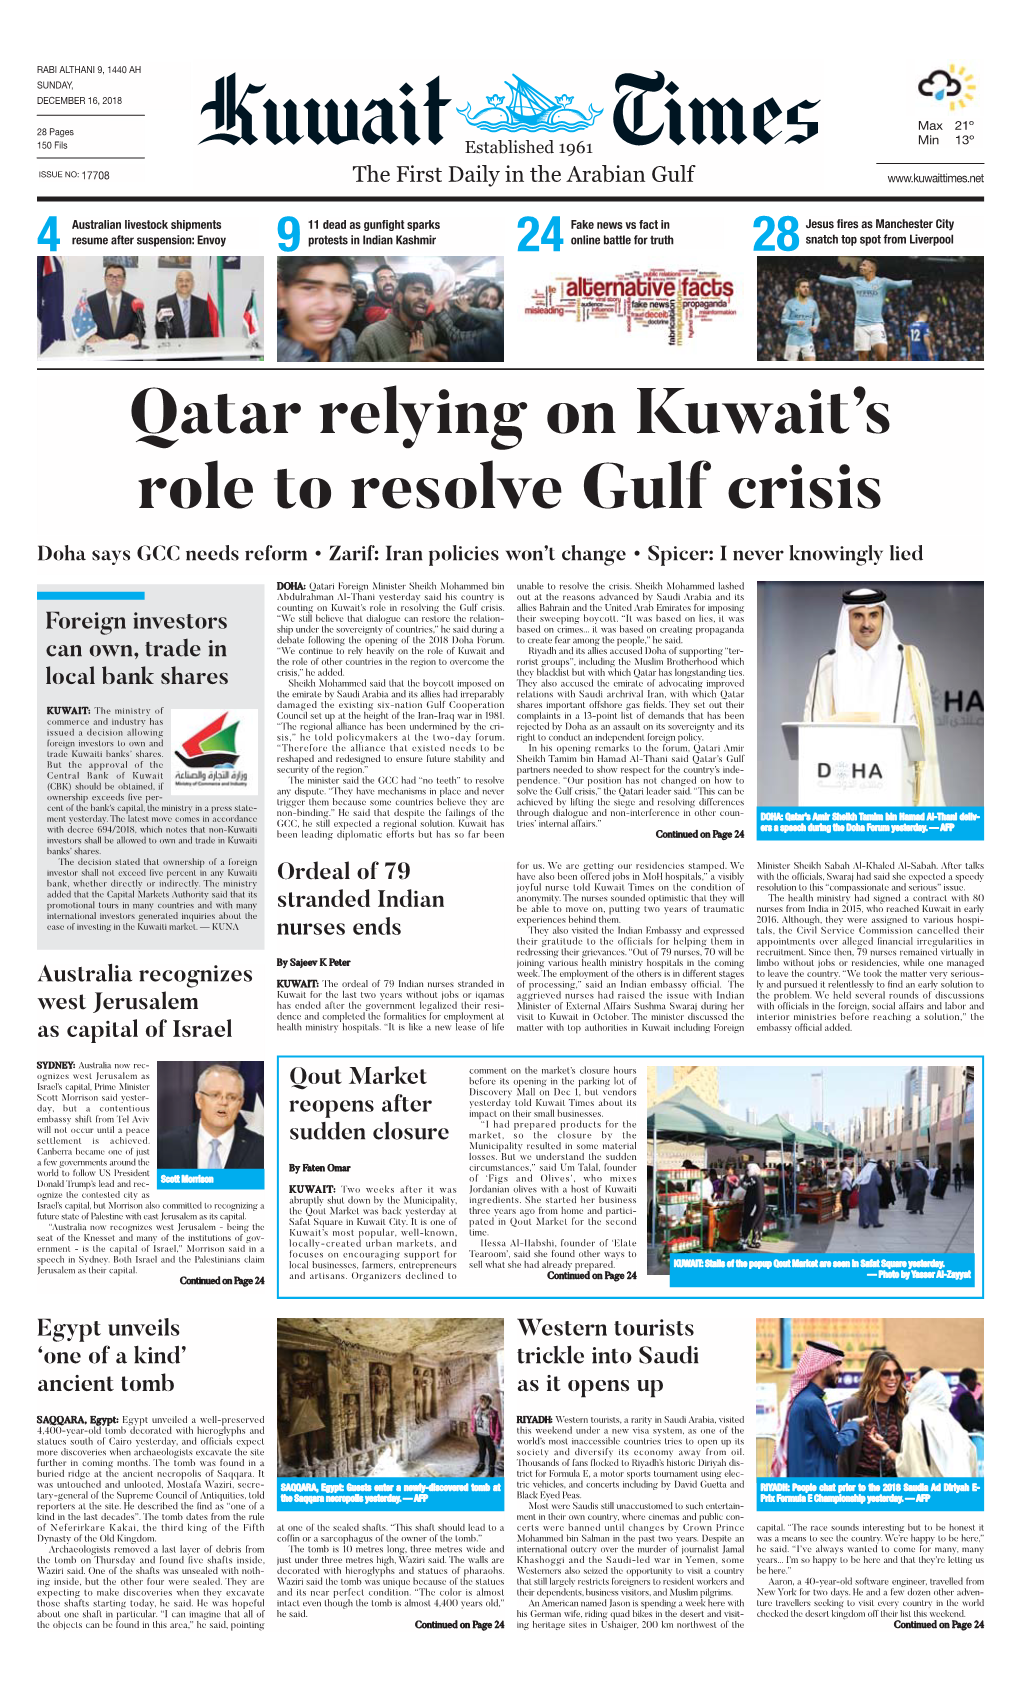 Qatar Relying on Kuwait's Role to Resolve Gulf Crisis